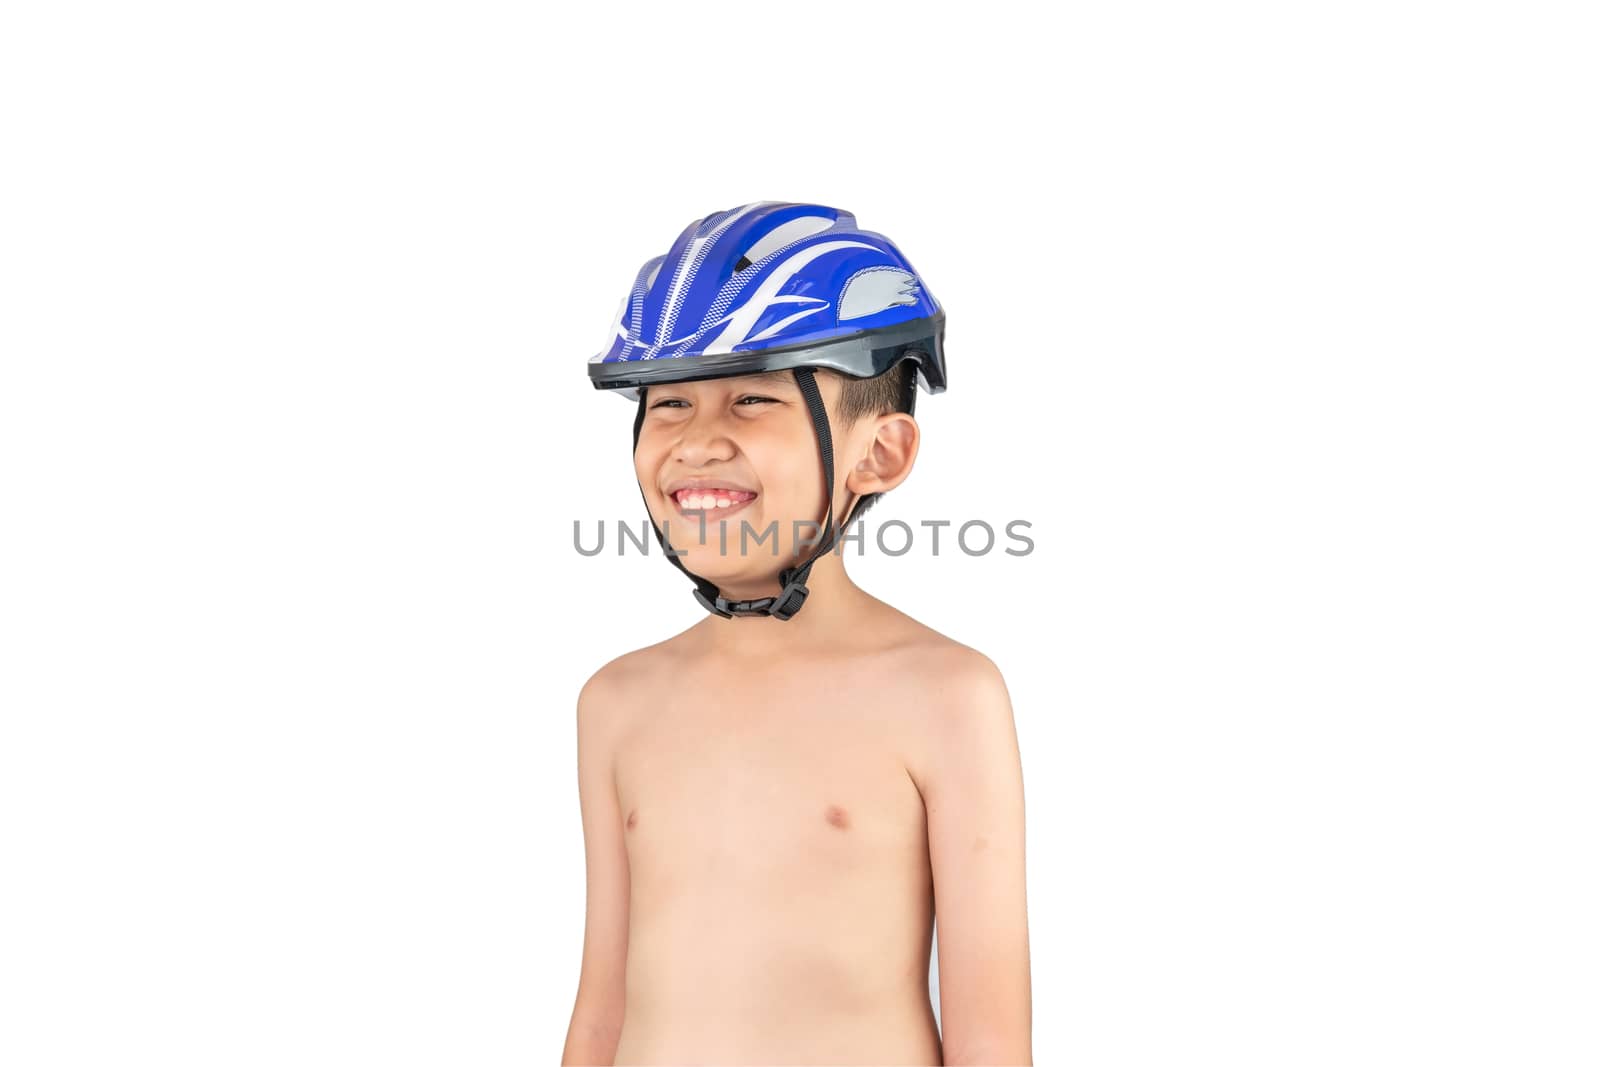 The boy wore a helmet on a white background. by wattanaphob